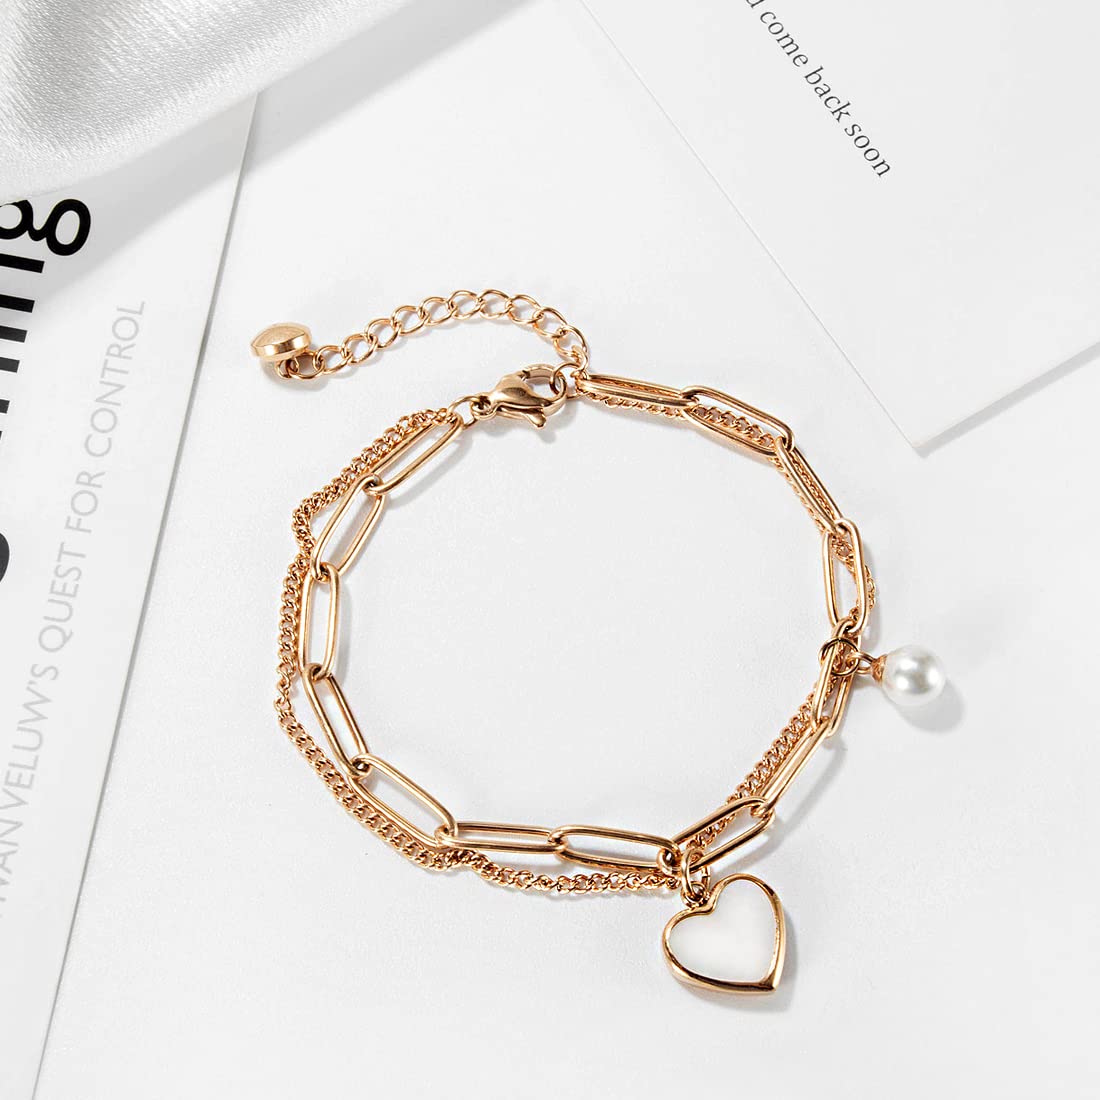 Buy Trendy Daily Use Simple Hand Chain Bracelet for Ladies